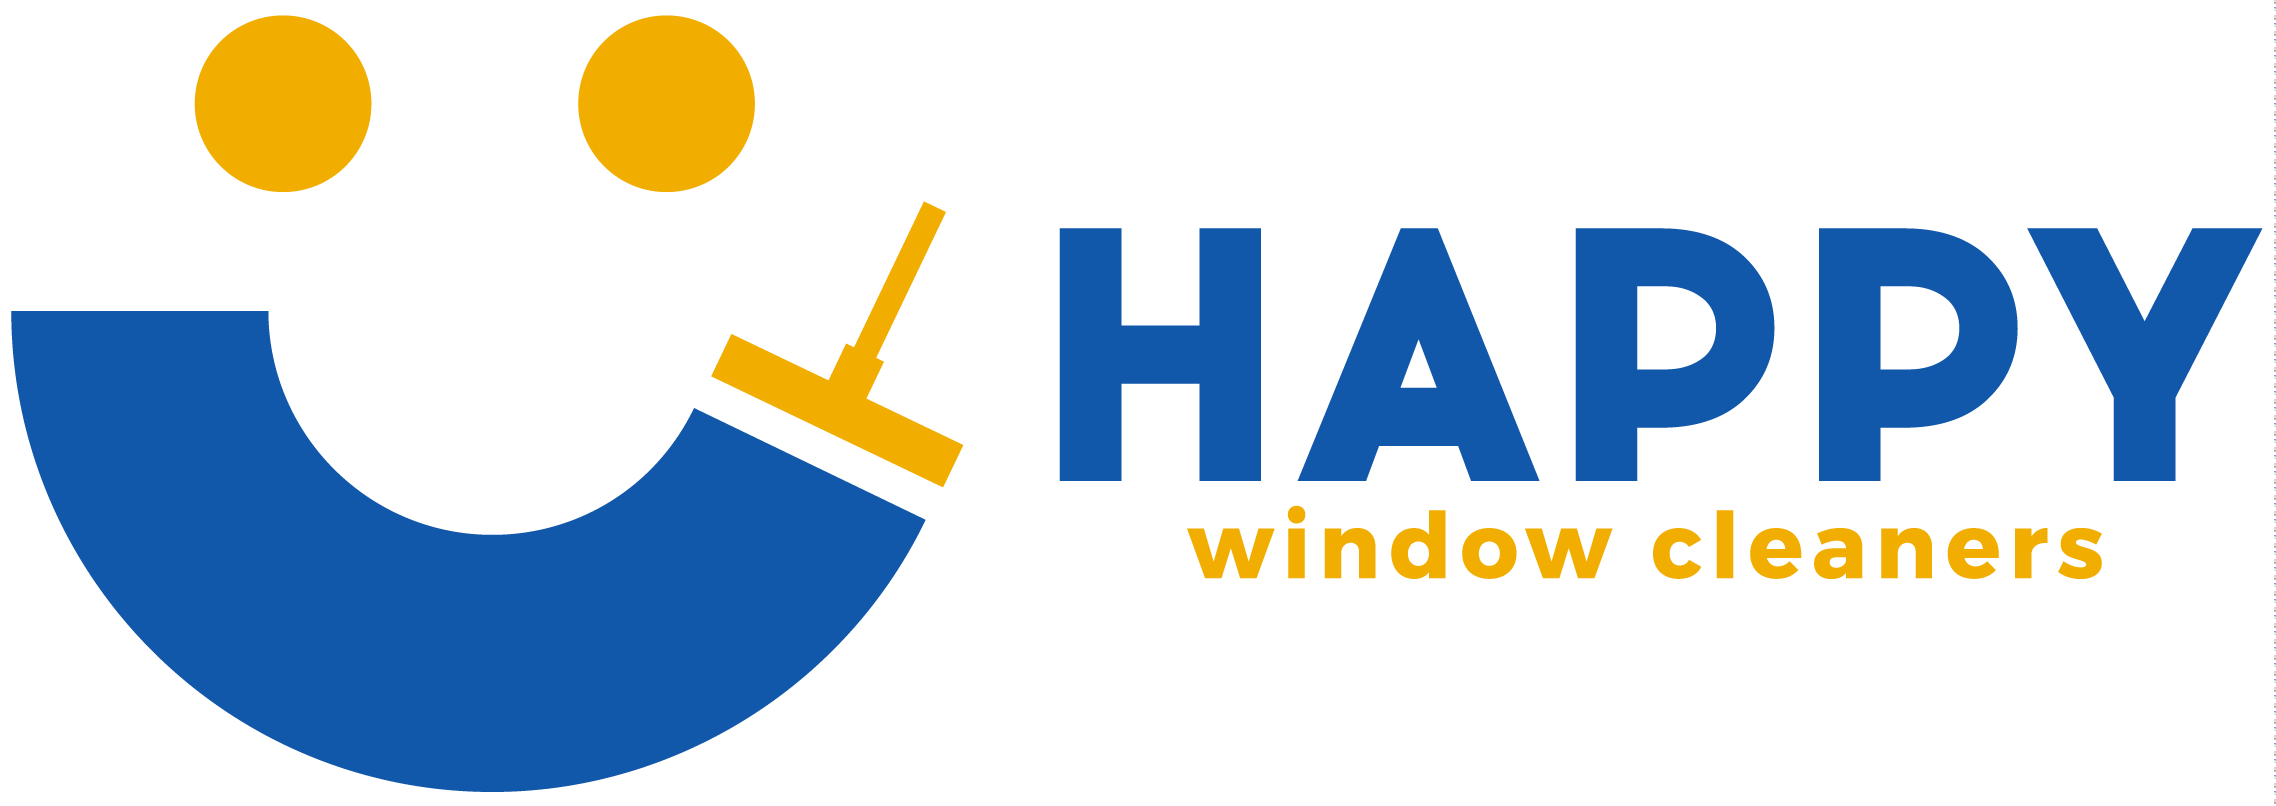 Happy Window Cleaner - window cleaning services Toronto